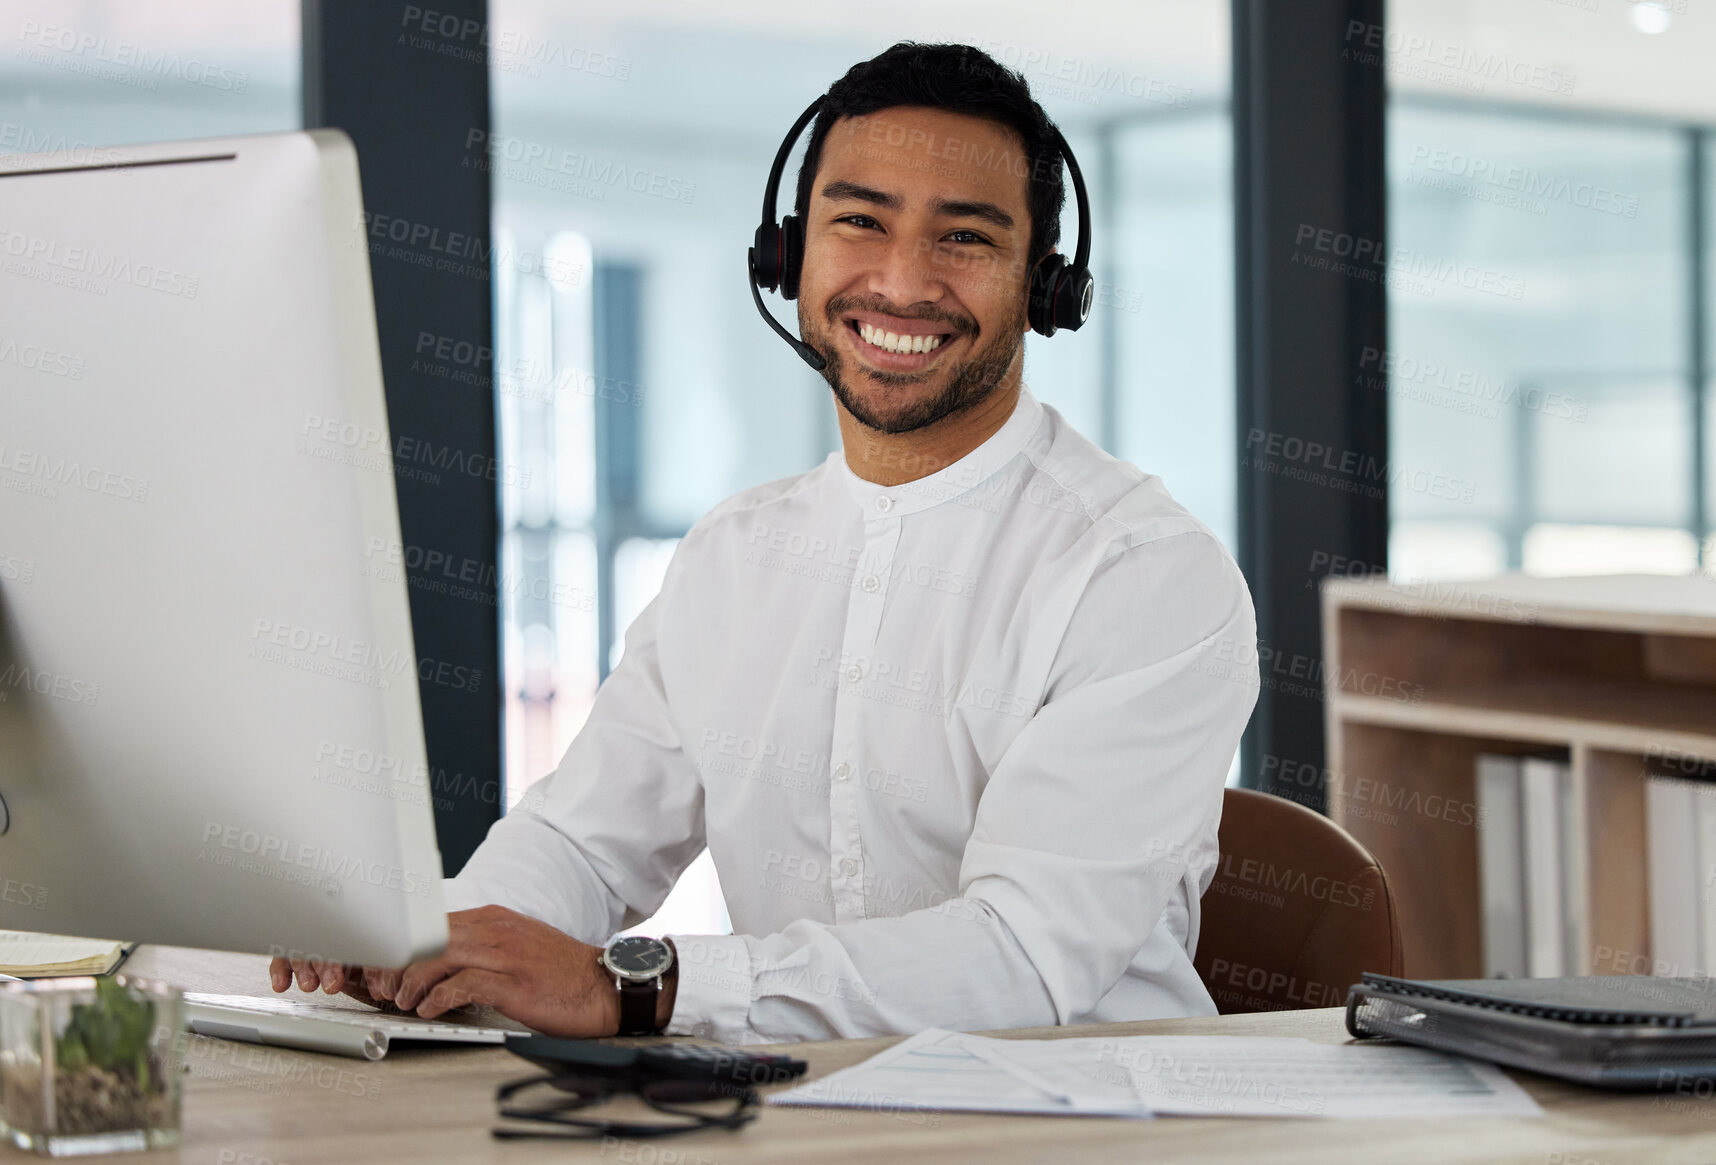 Buy stock photo Shot of a young man working in a call center